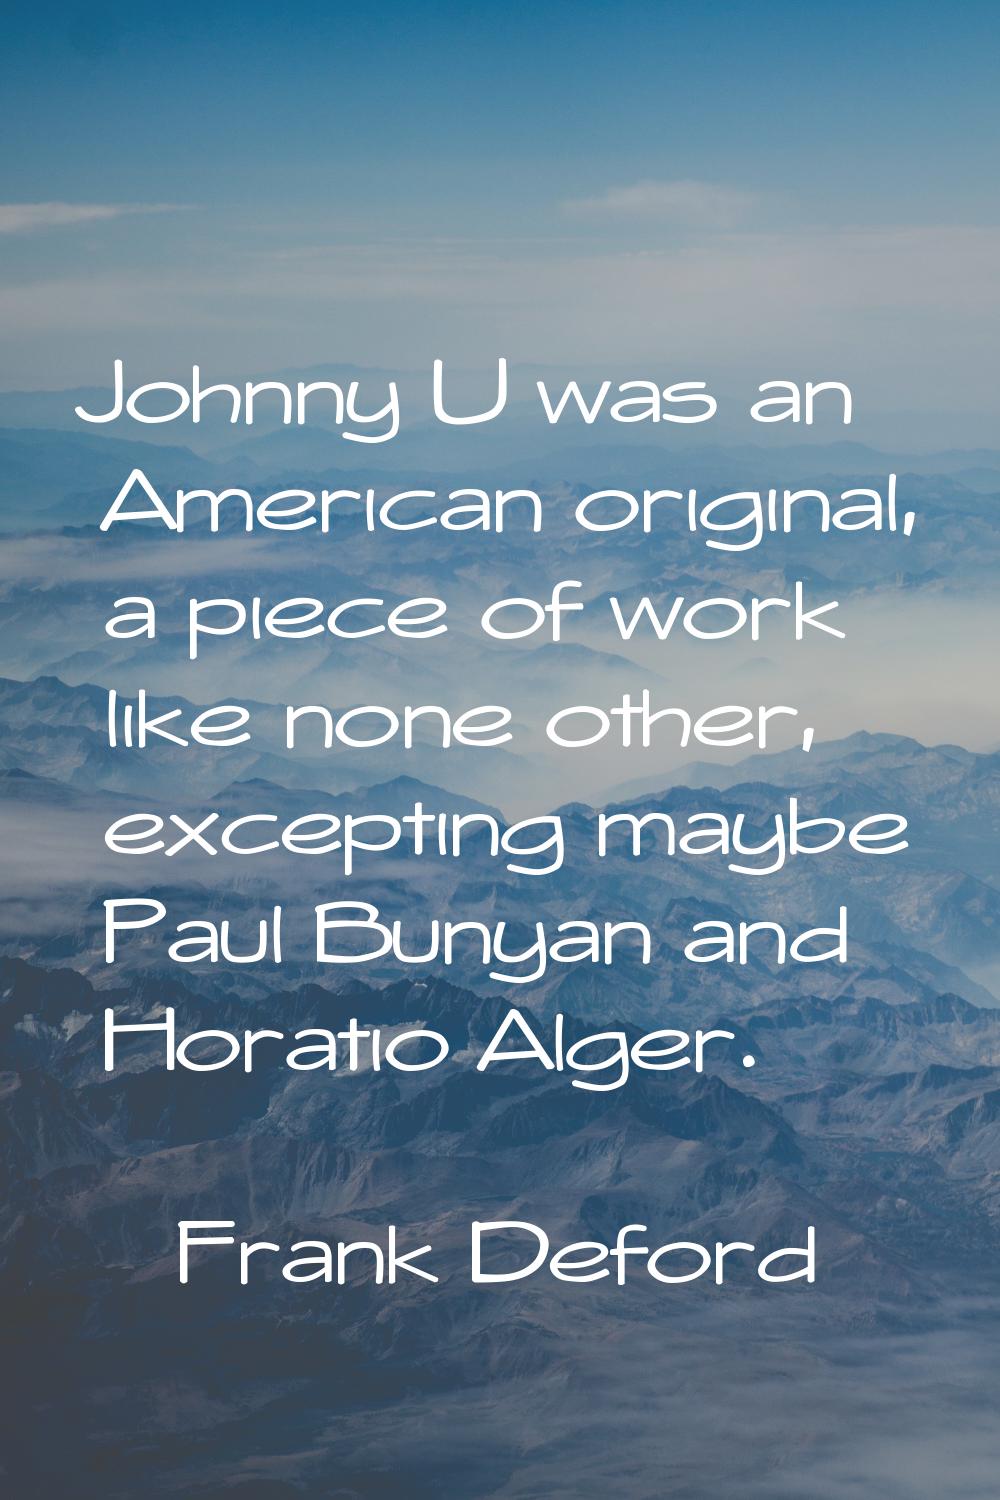 Johnny U was an American original, a piece of work like none other, excepting maybe Paul Bunyan and